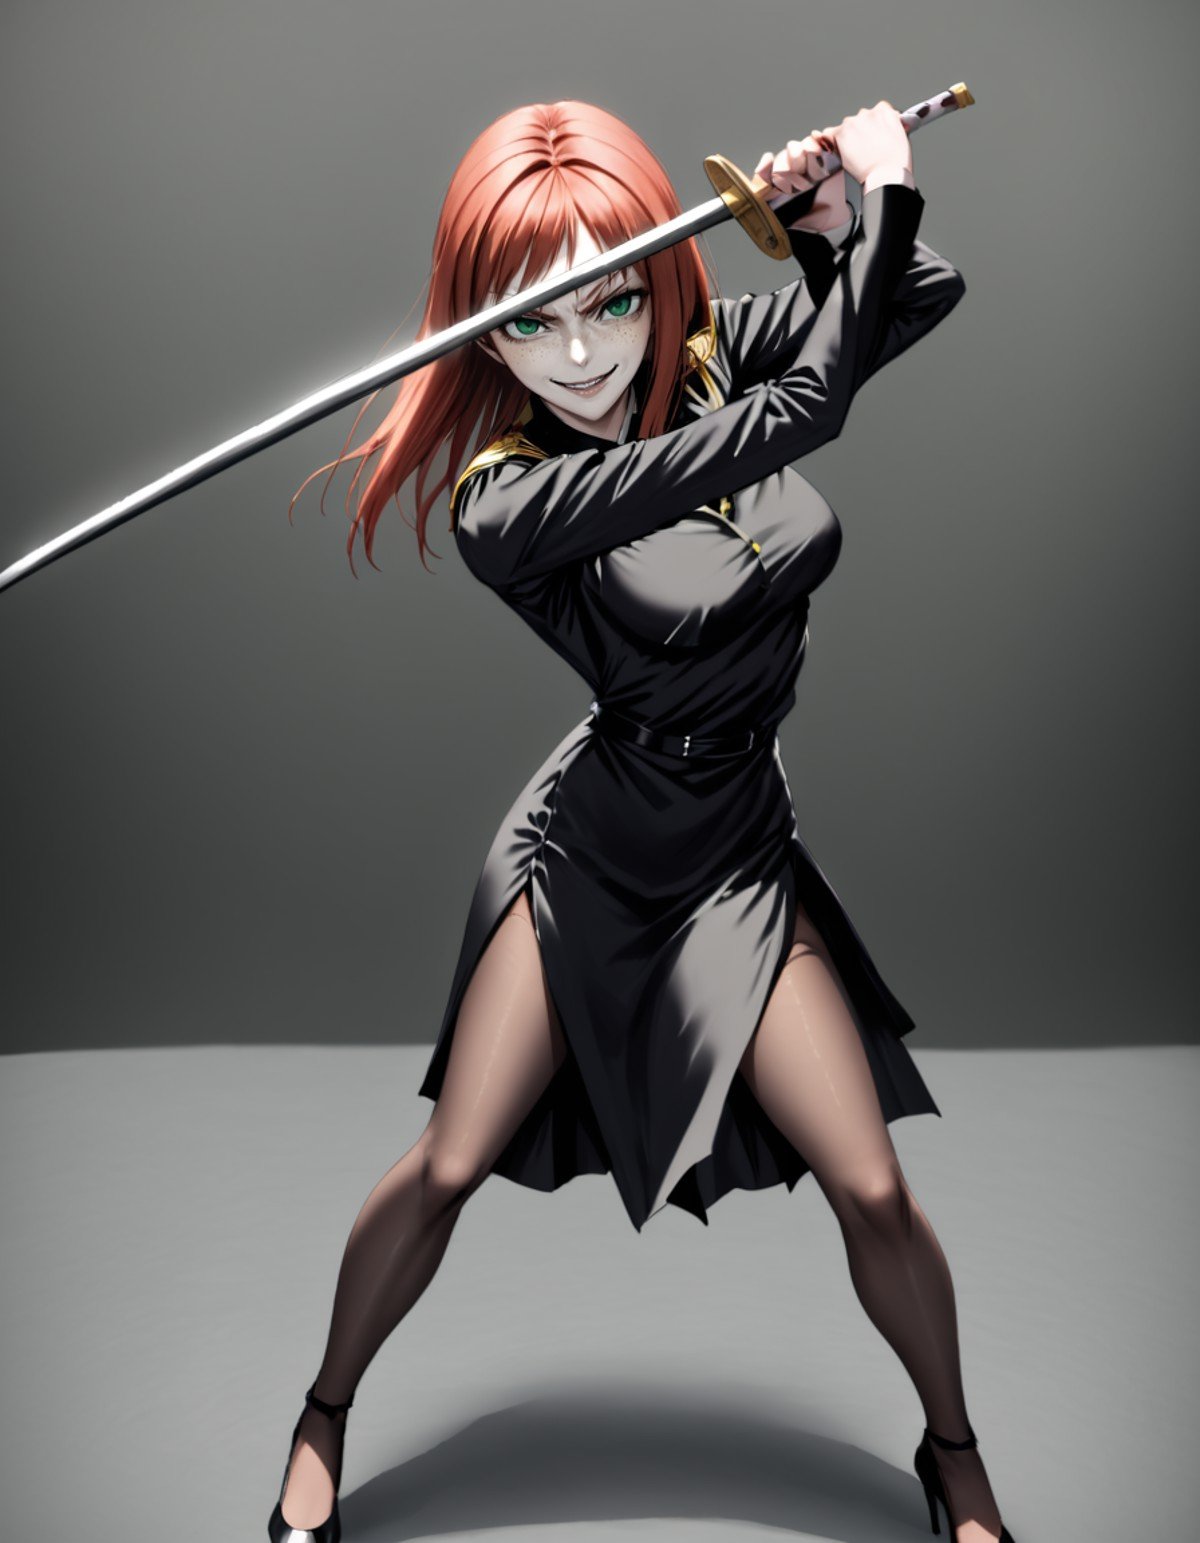 a realistic 20 year old anime kmw top model redhead woman, freckles,((high guard sword parry stance)),evil engimatic smile,high couture black dress, black pantyhose, high heels,office background,facing viewer,green eyes, <lora:kmw_v53:1> <lora:high-guard-sword-parry-stance:1>